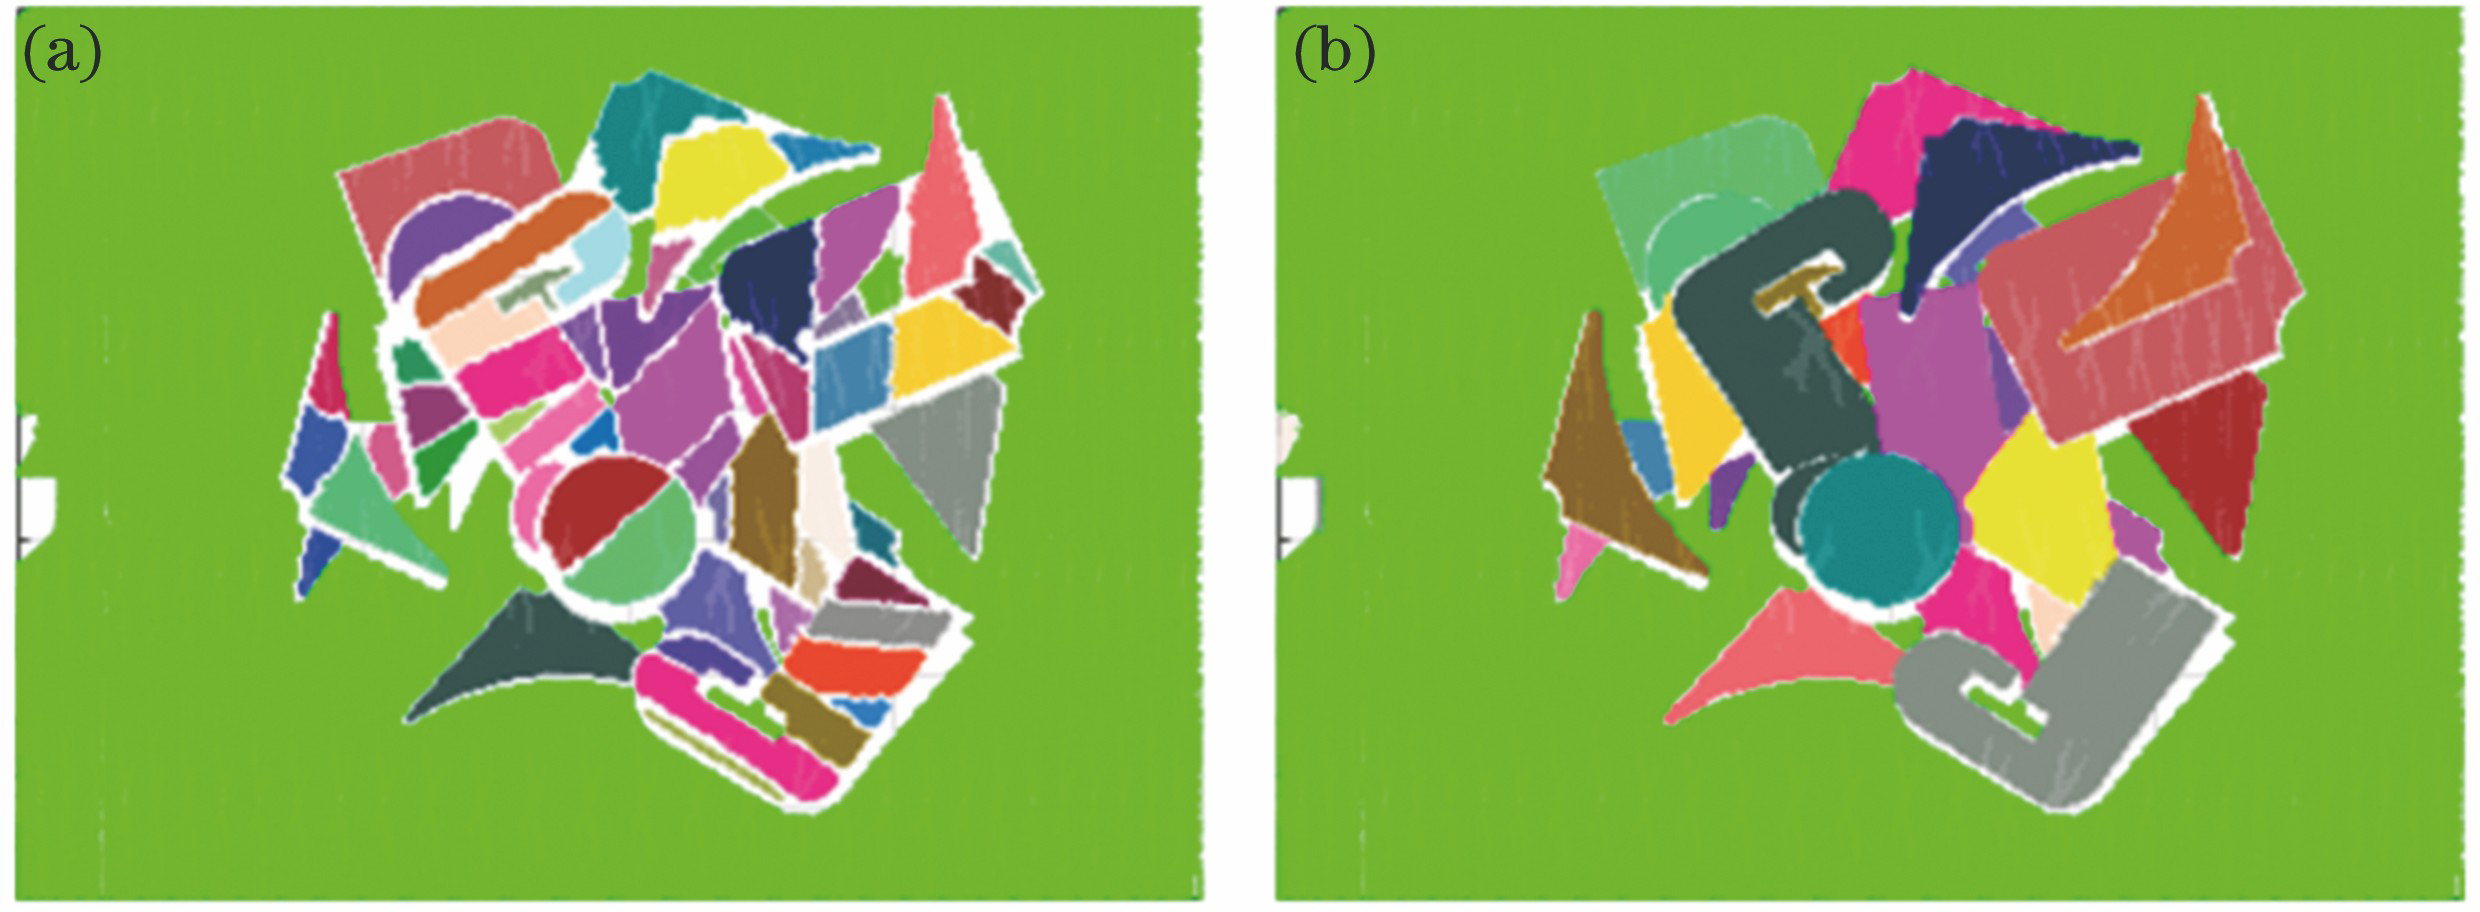 Results obtained before and after region merging. (a) Connected planar regions; (b) merged result obtained with glue algorithm